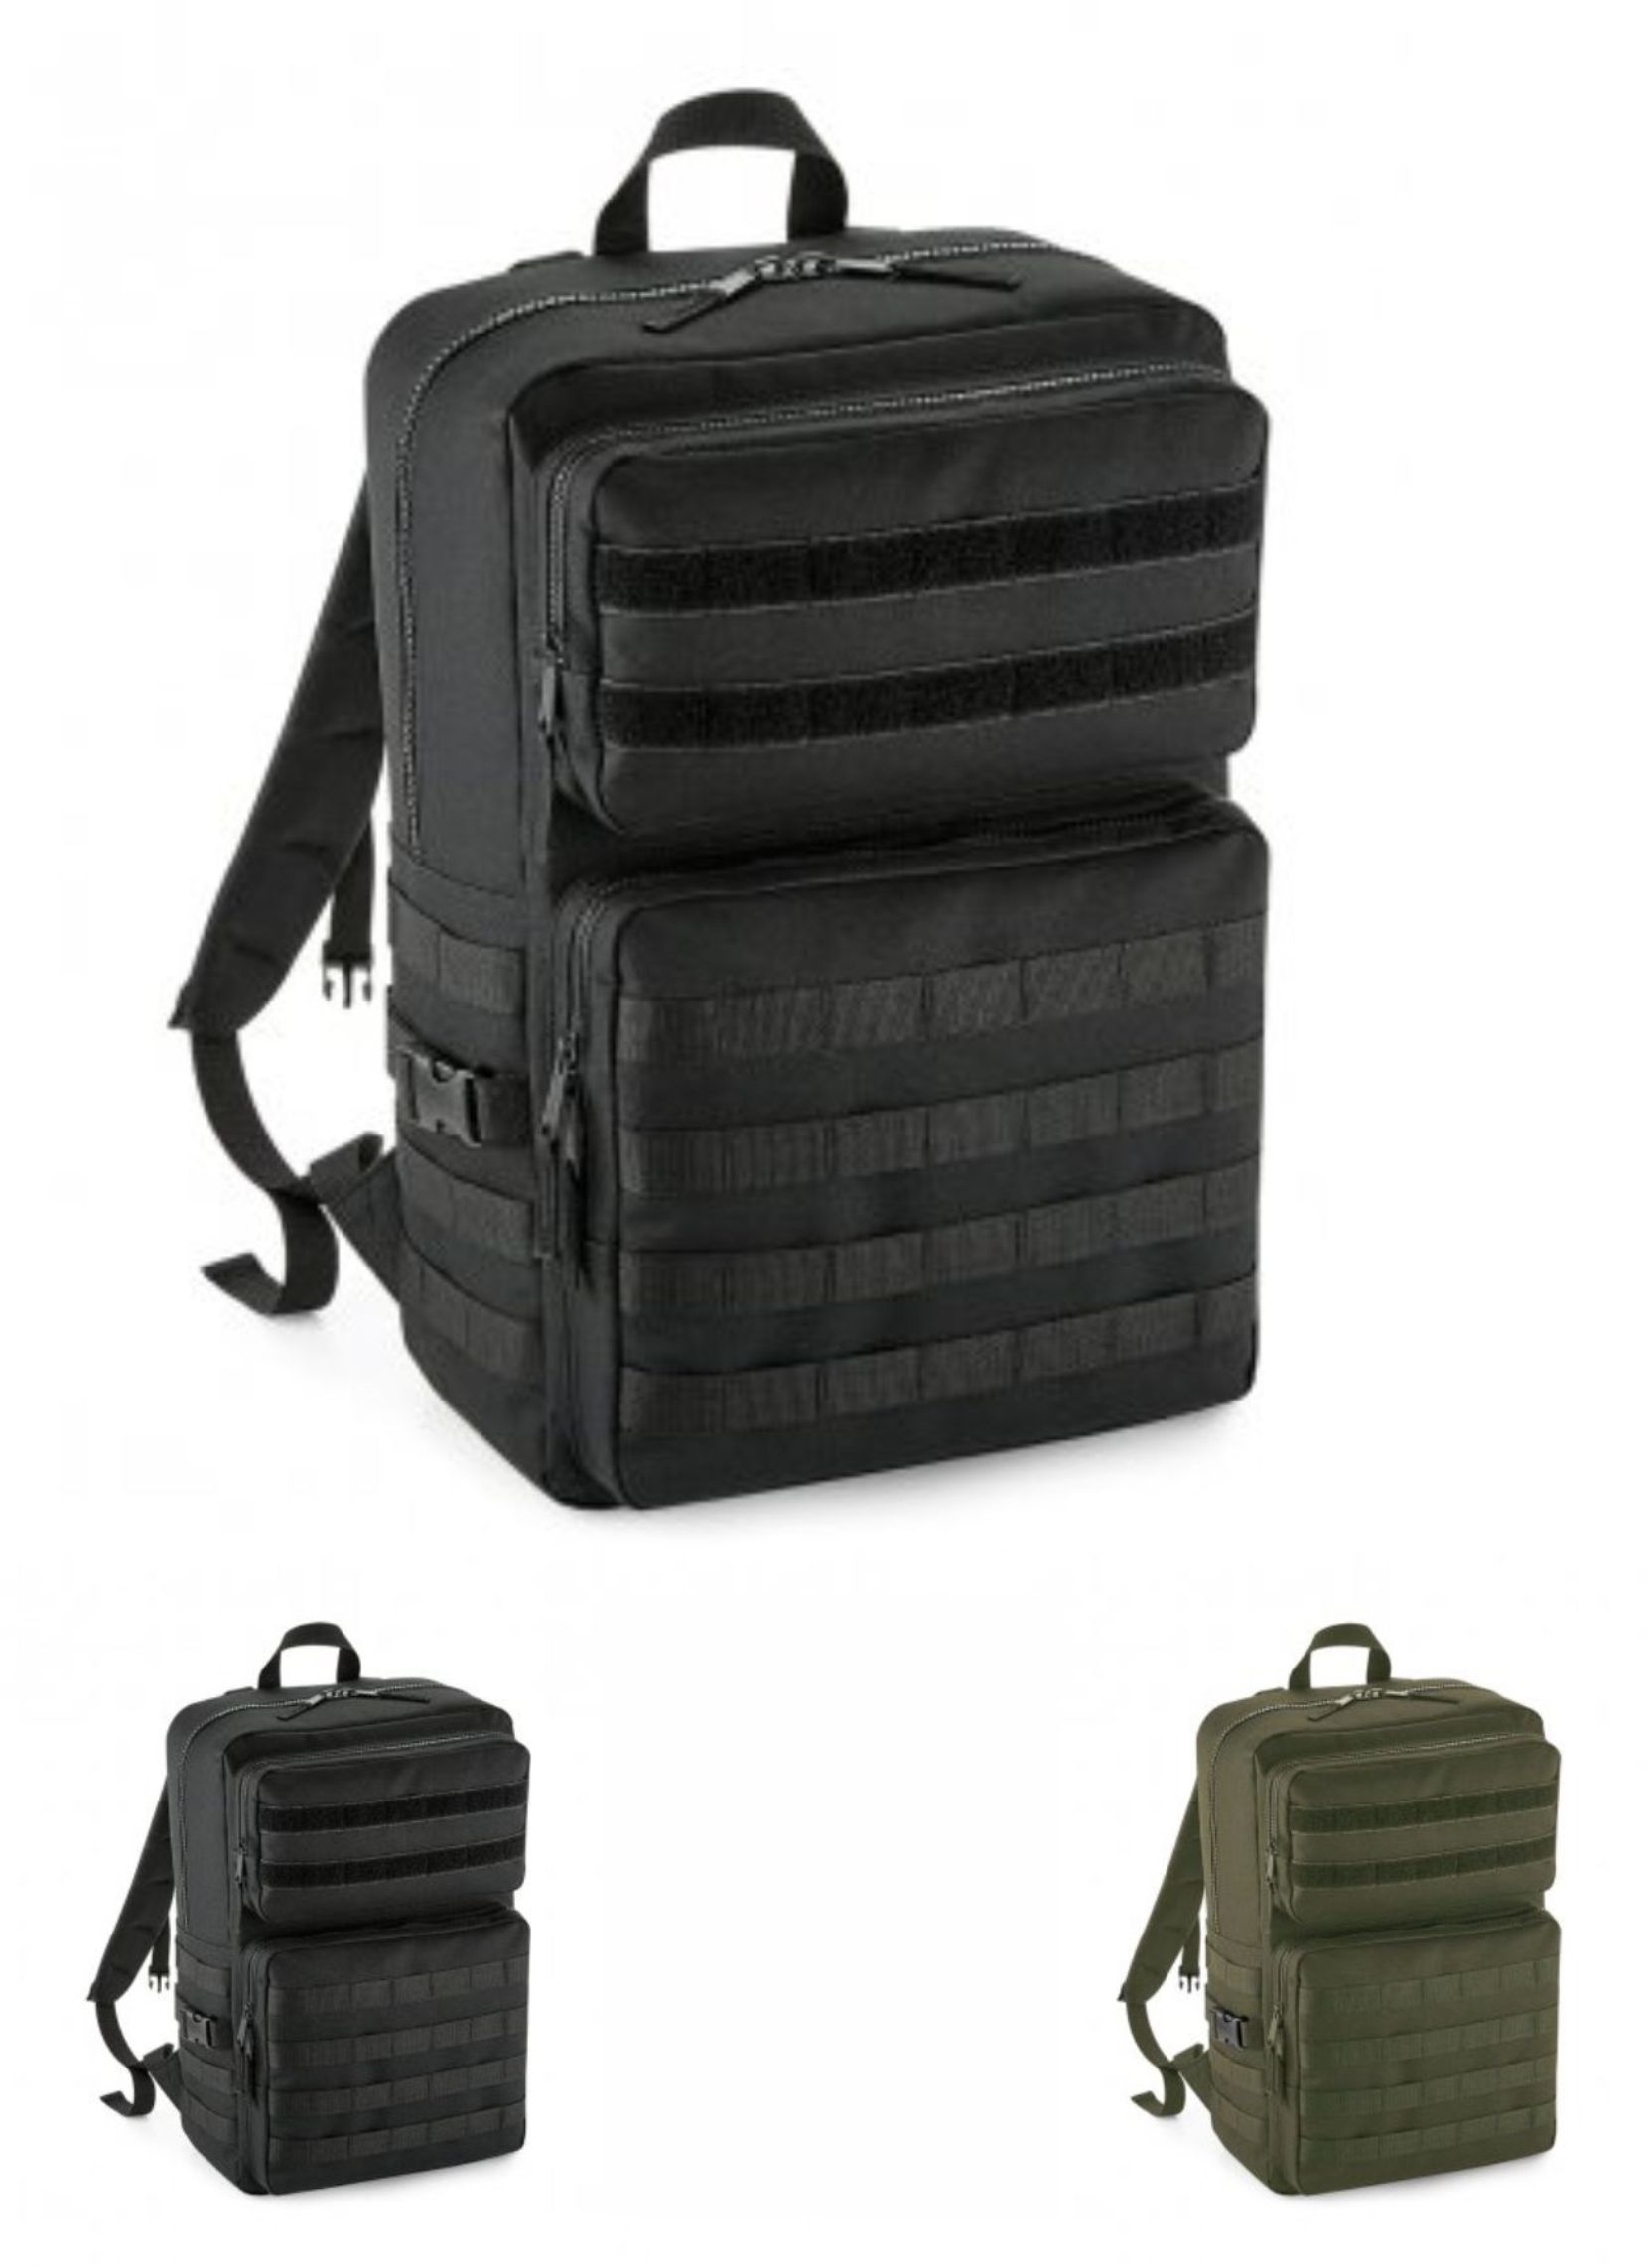 BG848 Bagbase Molle Tactical Backpack - Click Image to Close